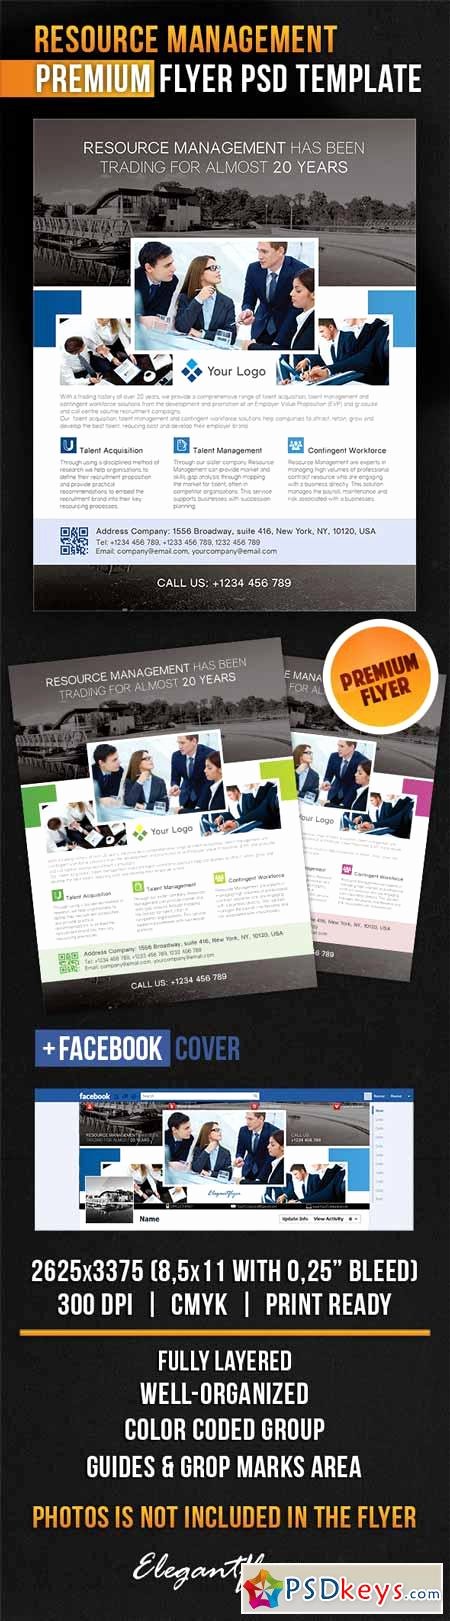 Facebook Ad Template Psd Fresh Resource Management – Flyer Psd Template Cover